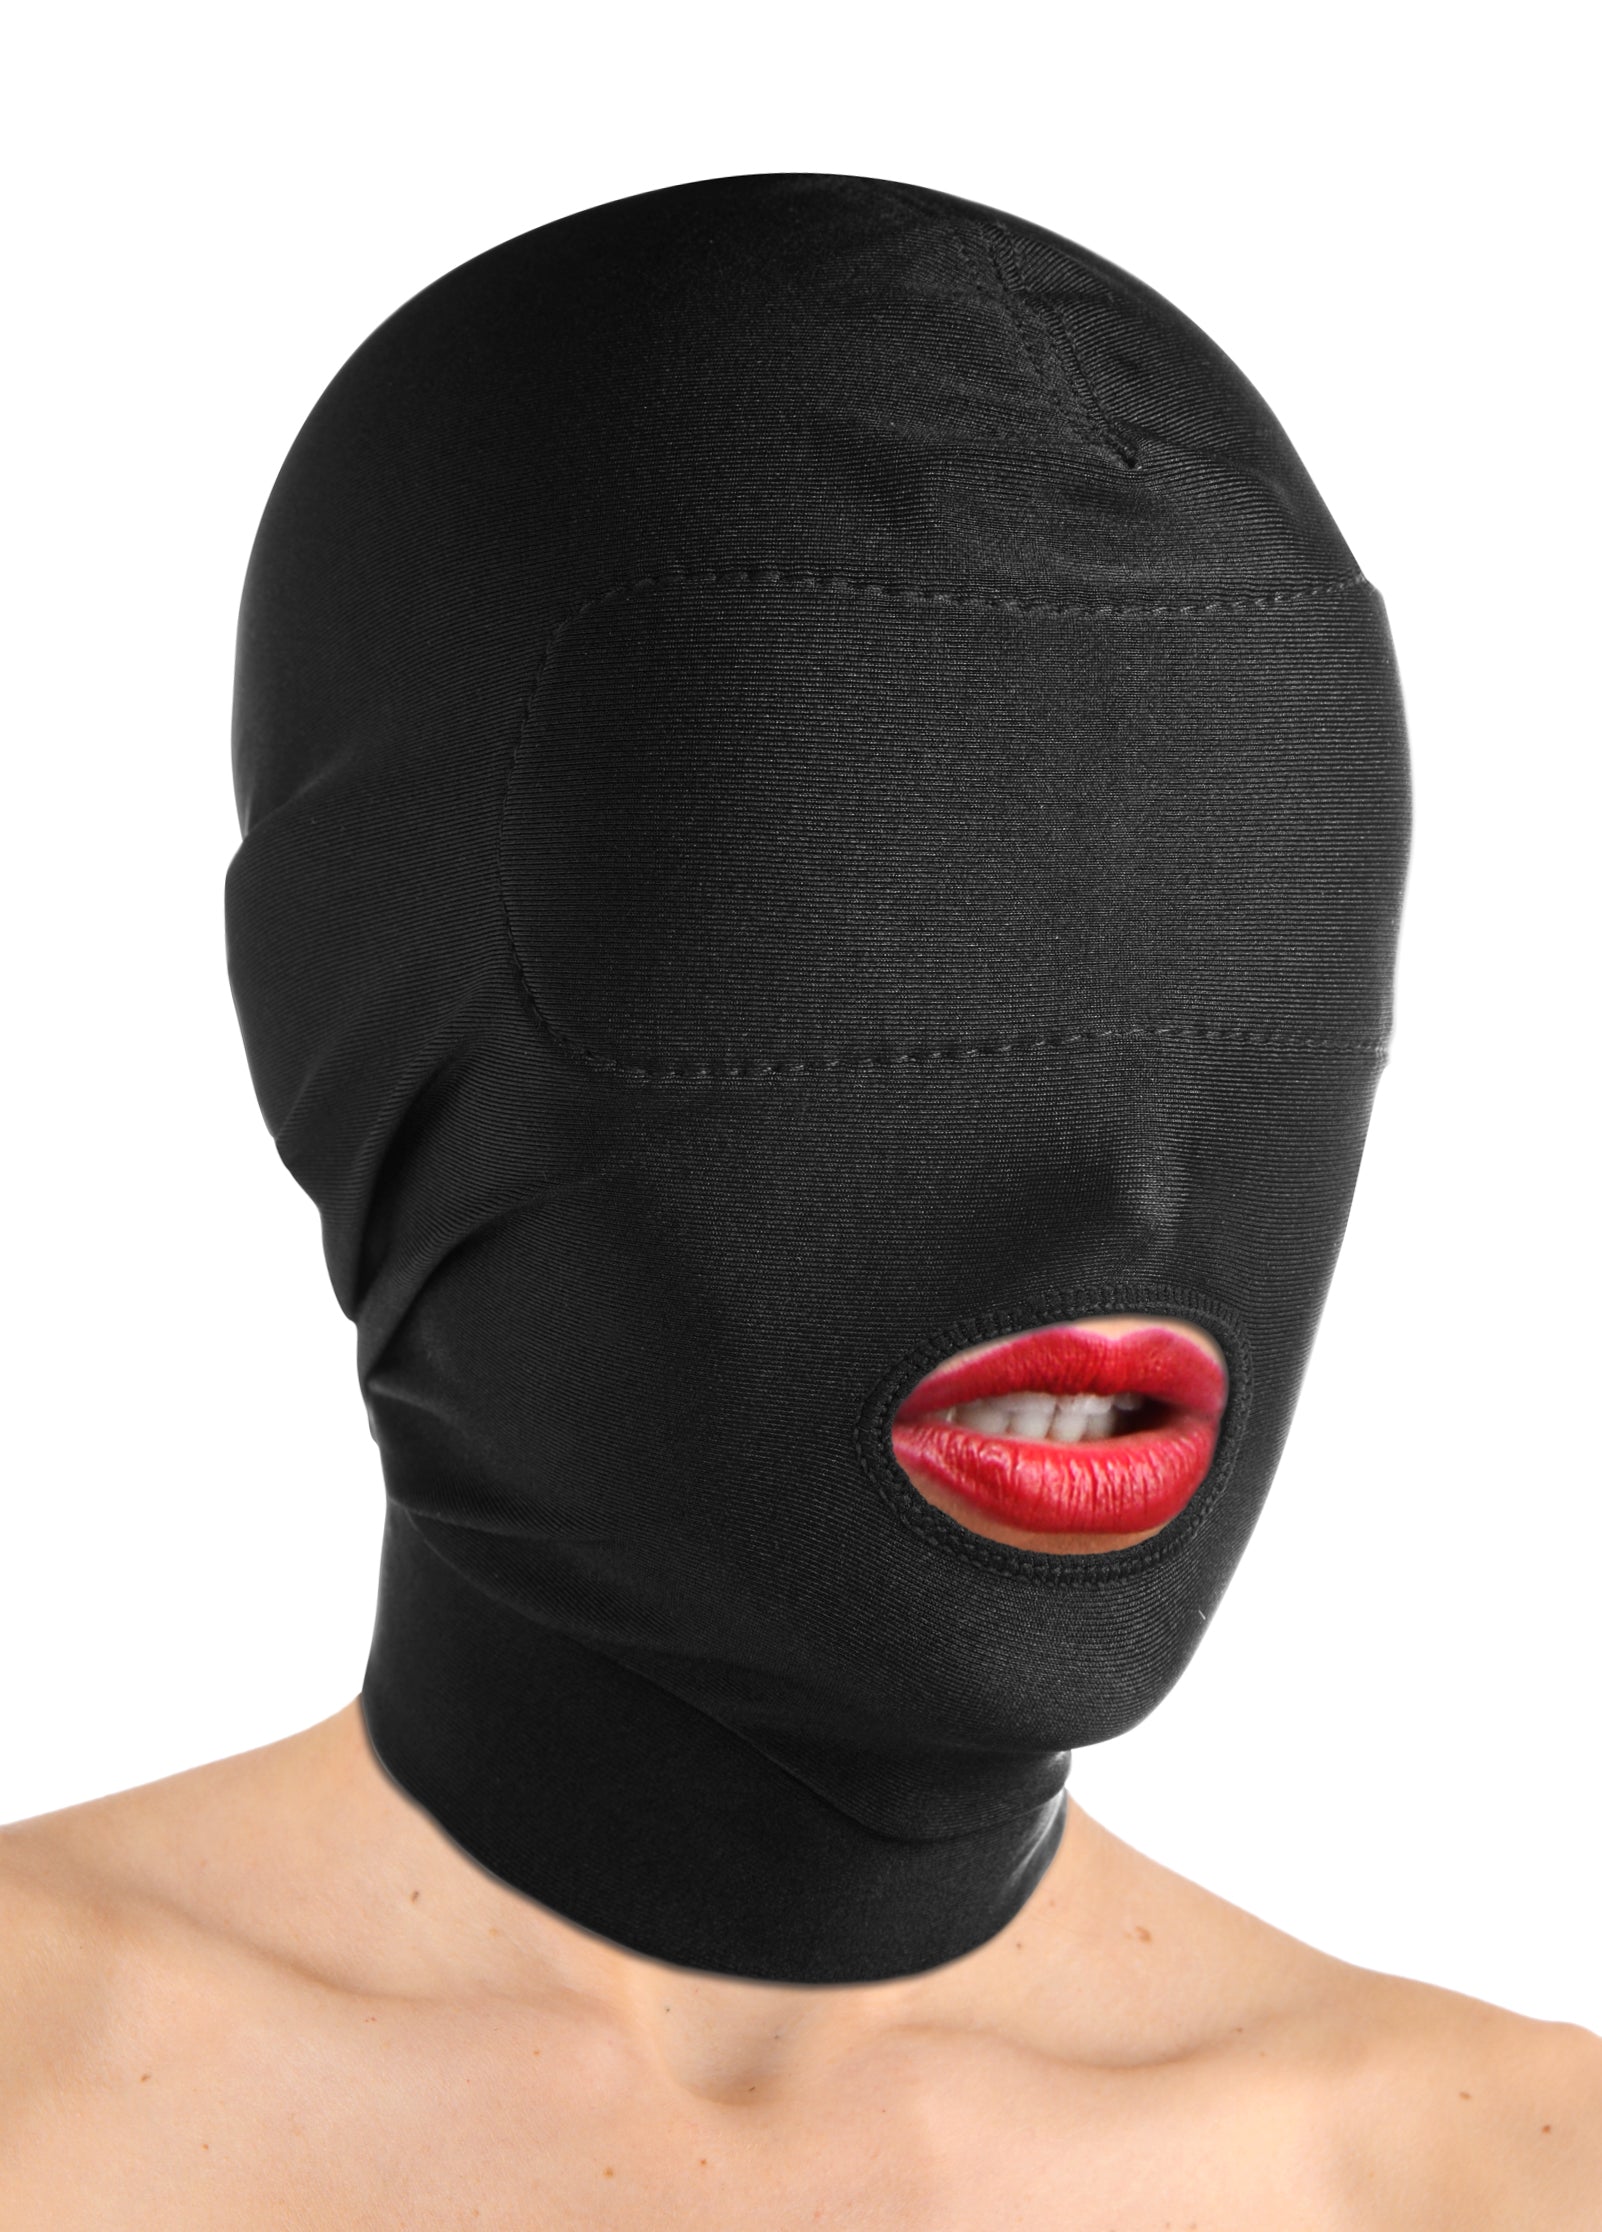 Master Series Disguise Open Mouth Hood